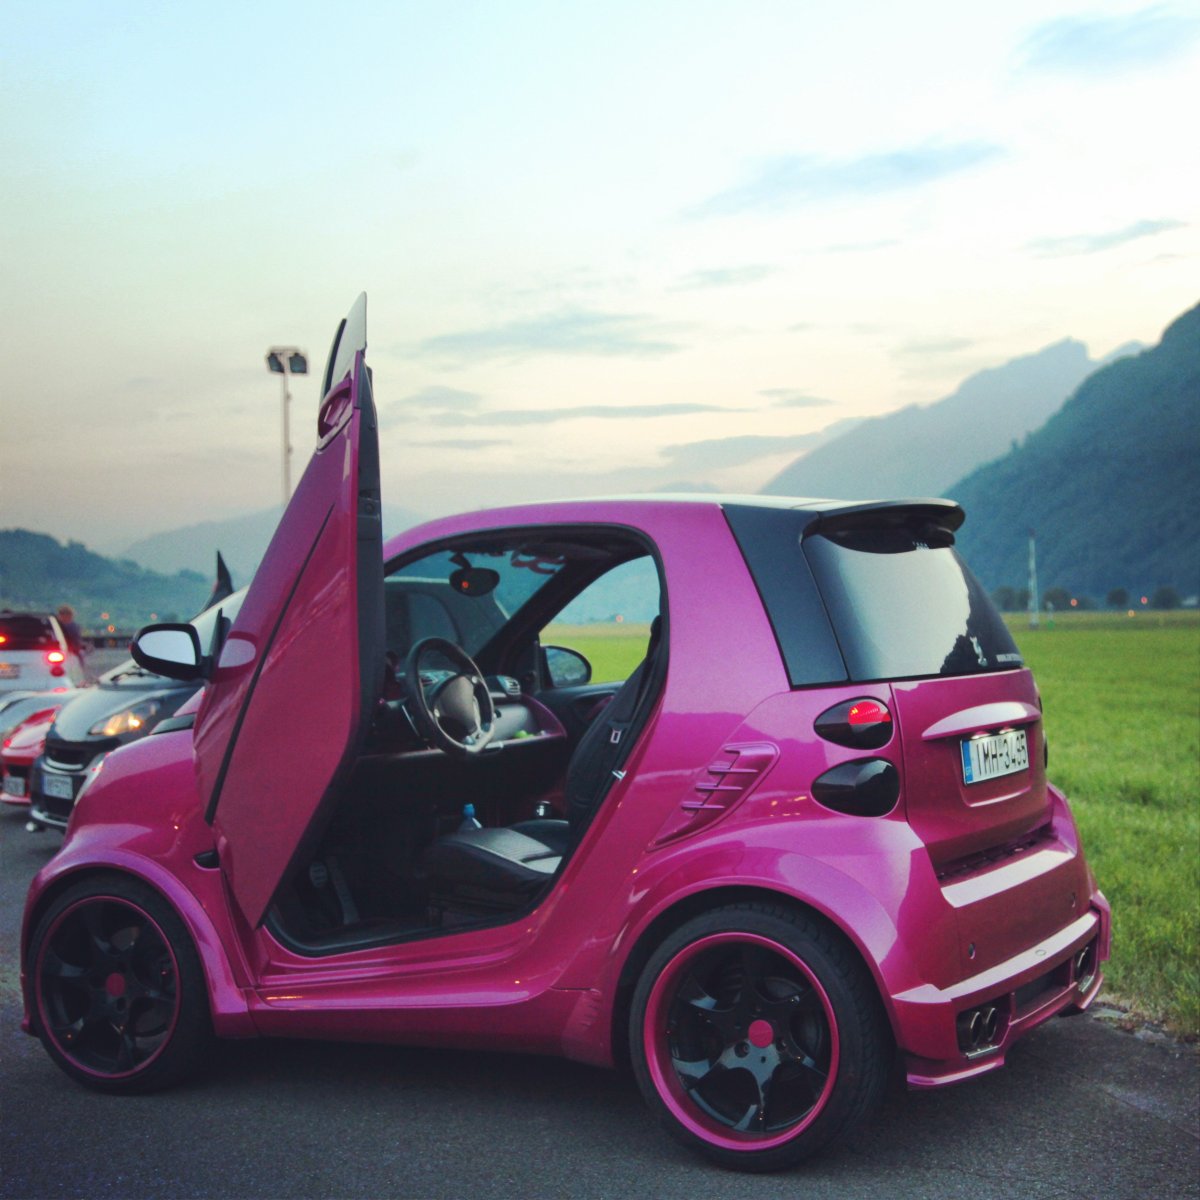 Mercedes Smart Fortwo